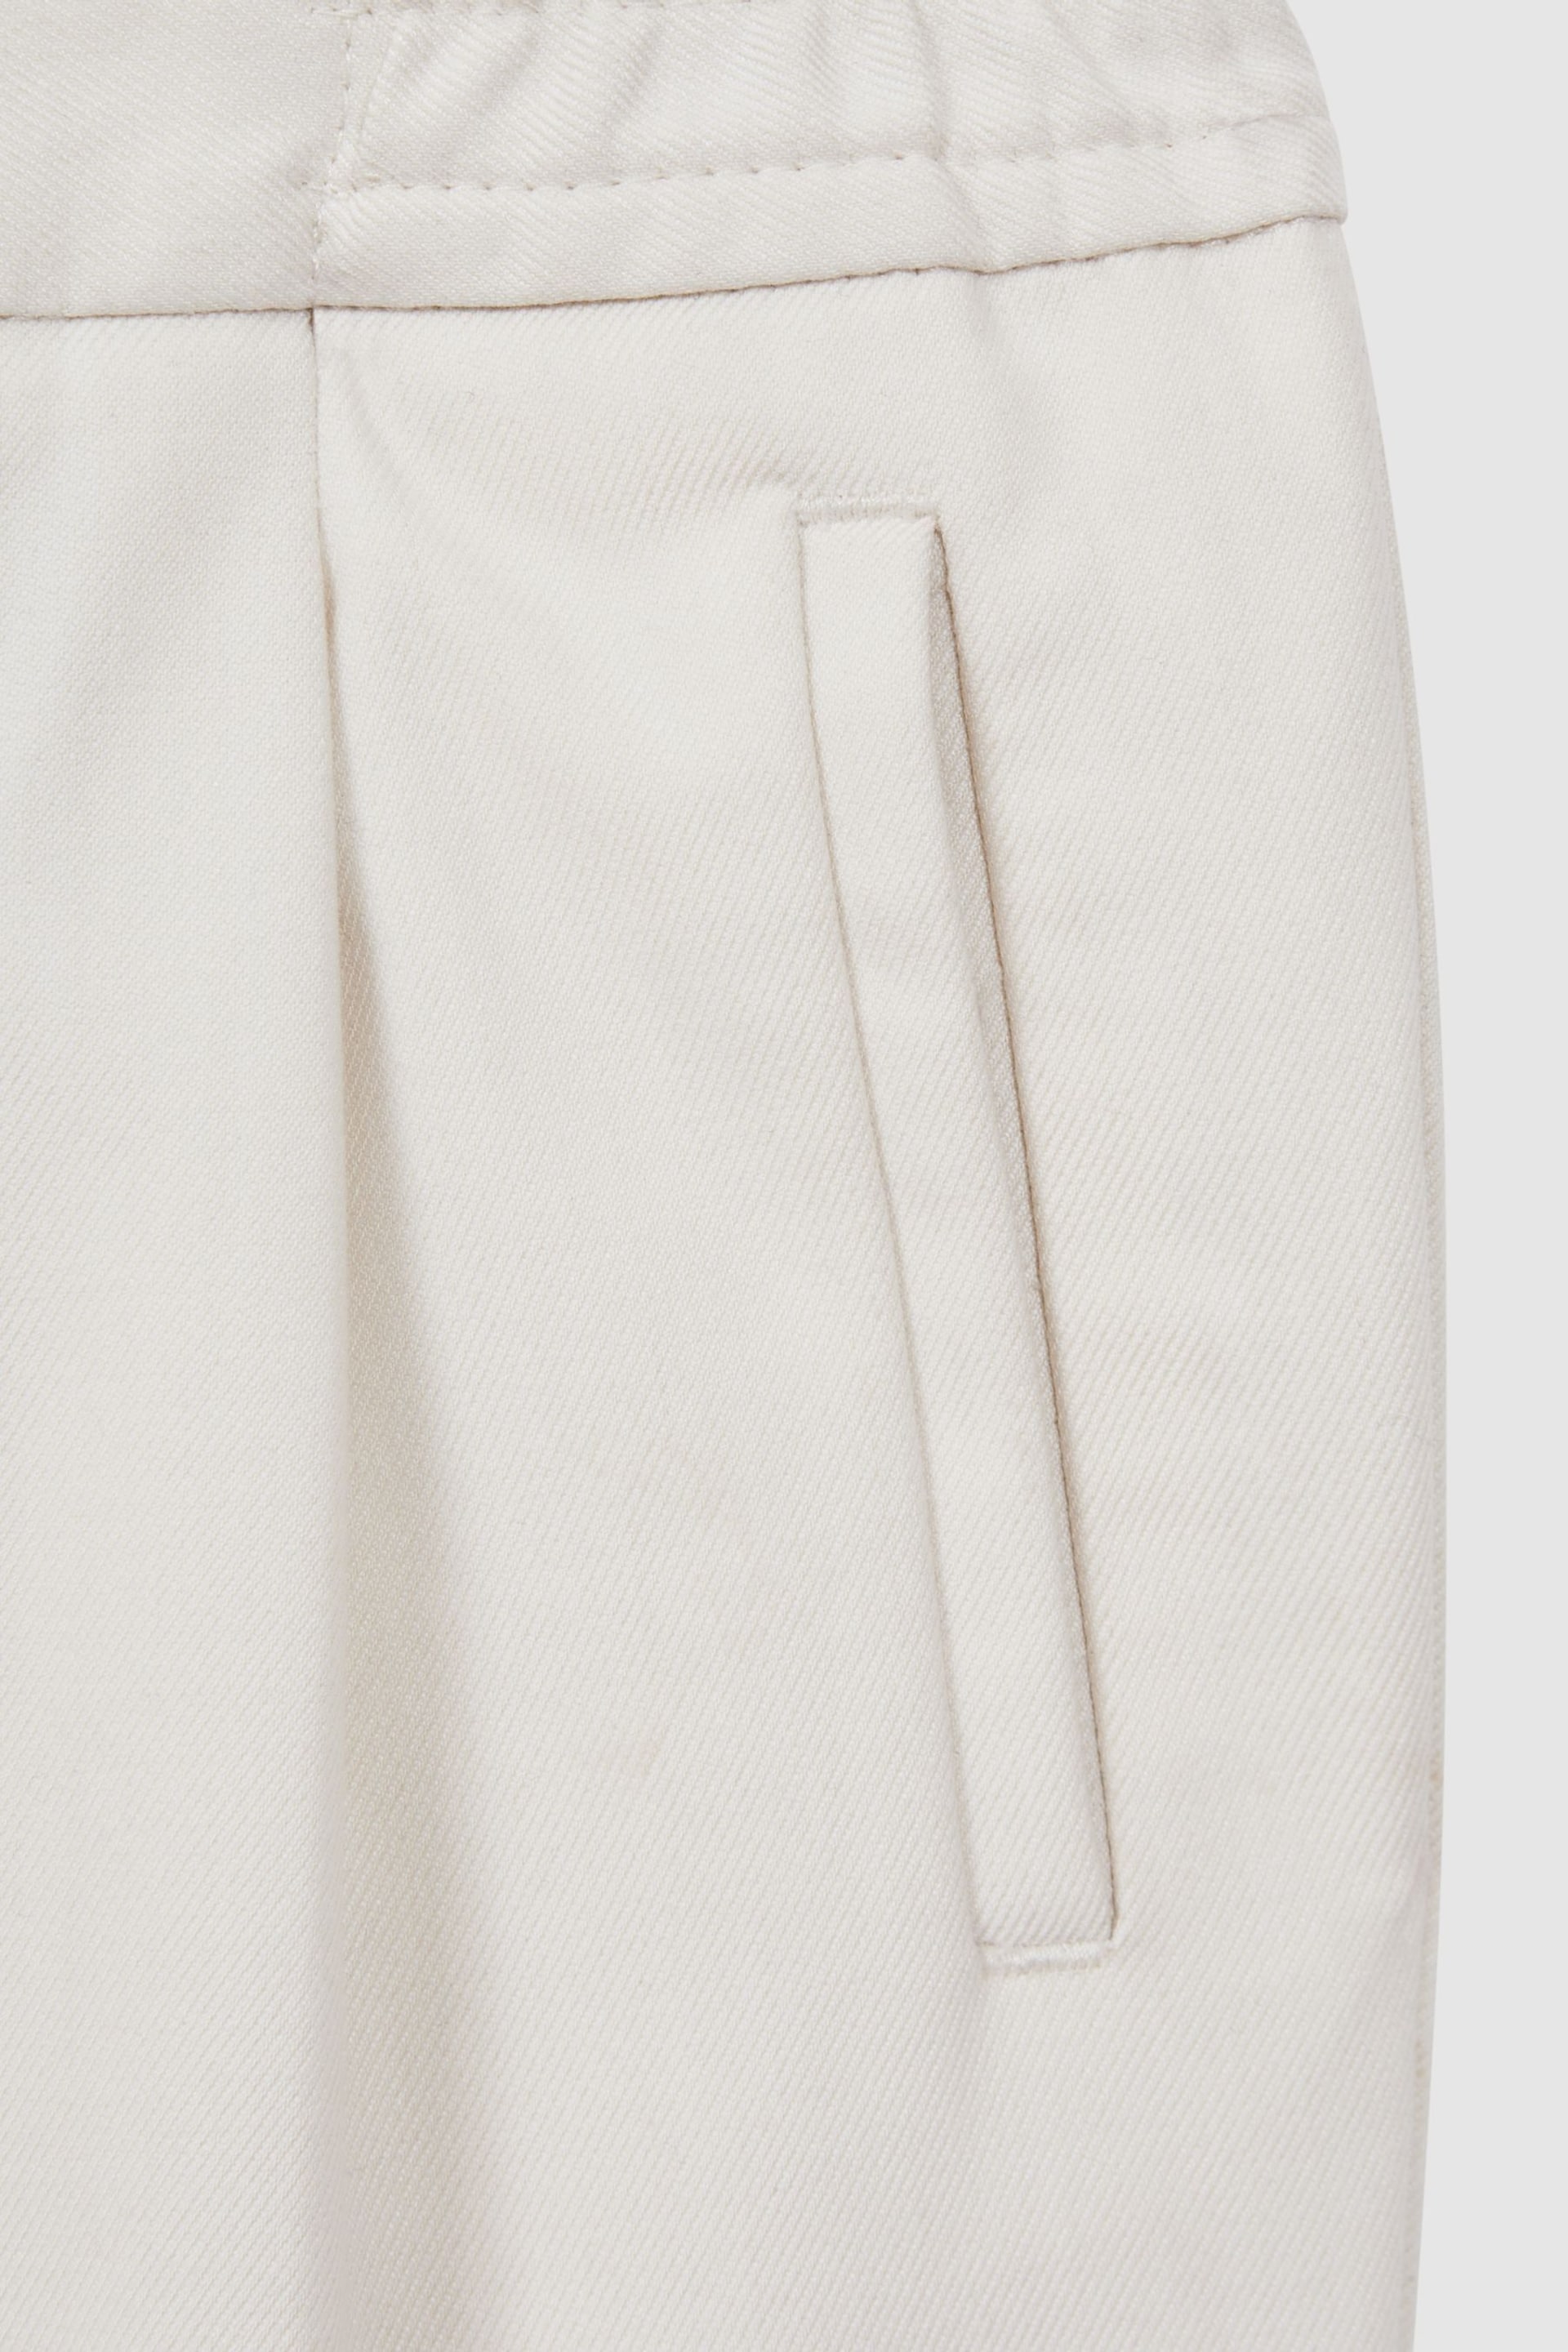 Reiss Ecru Brighton Senior Relaxed Elasticated Trousers with Turn-Ups - Image 6 of 6